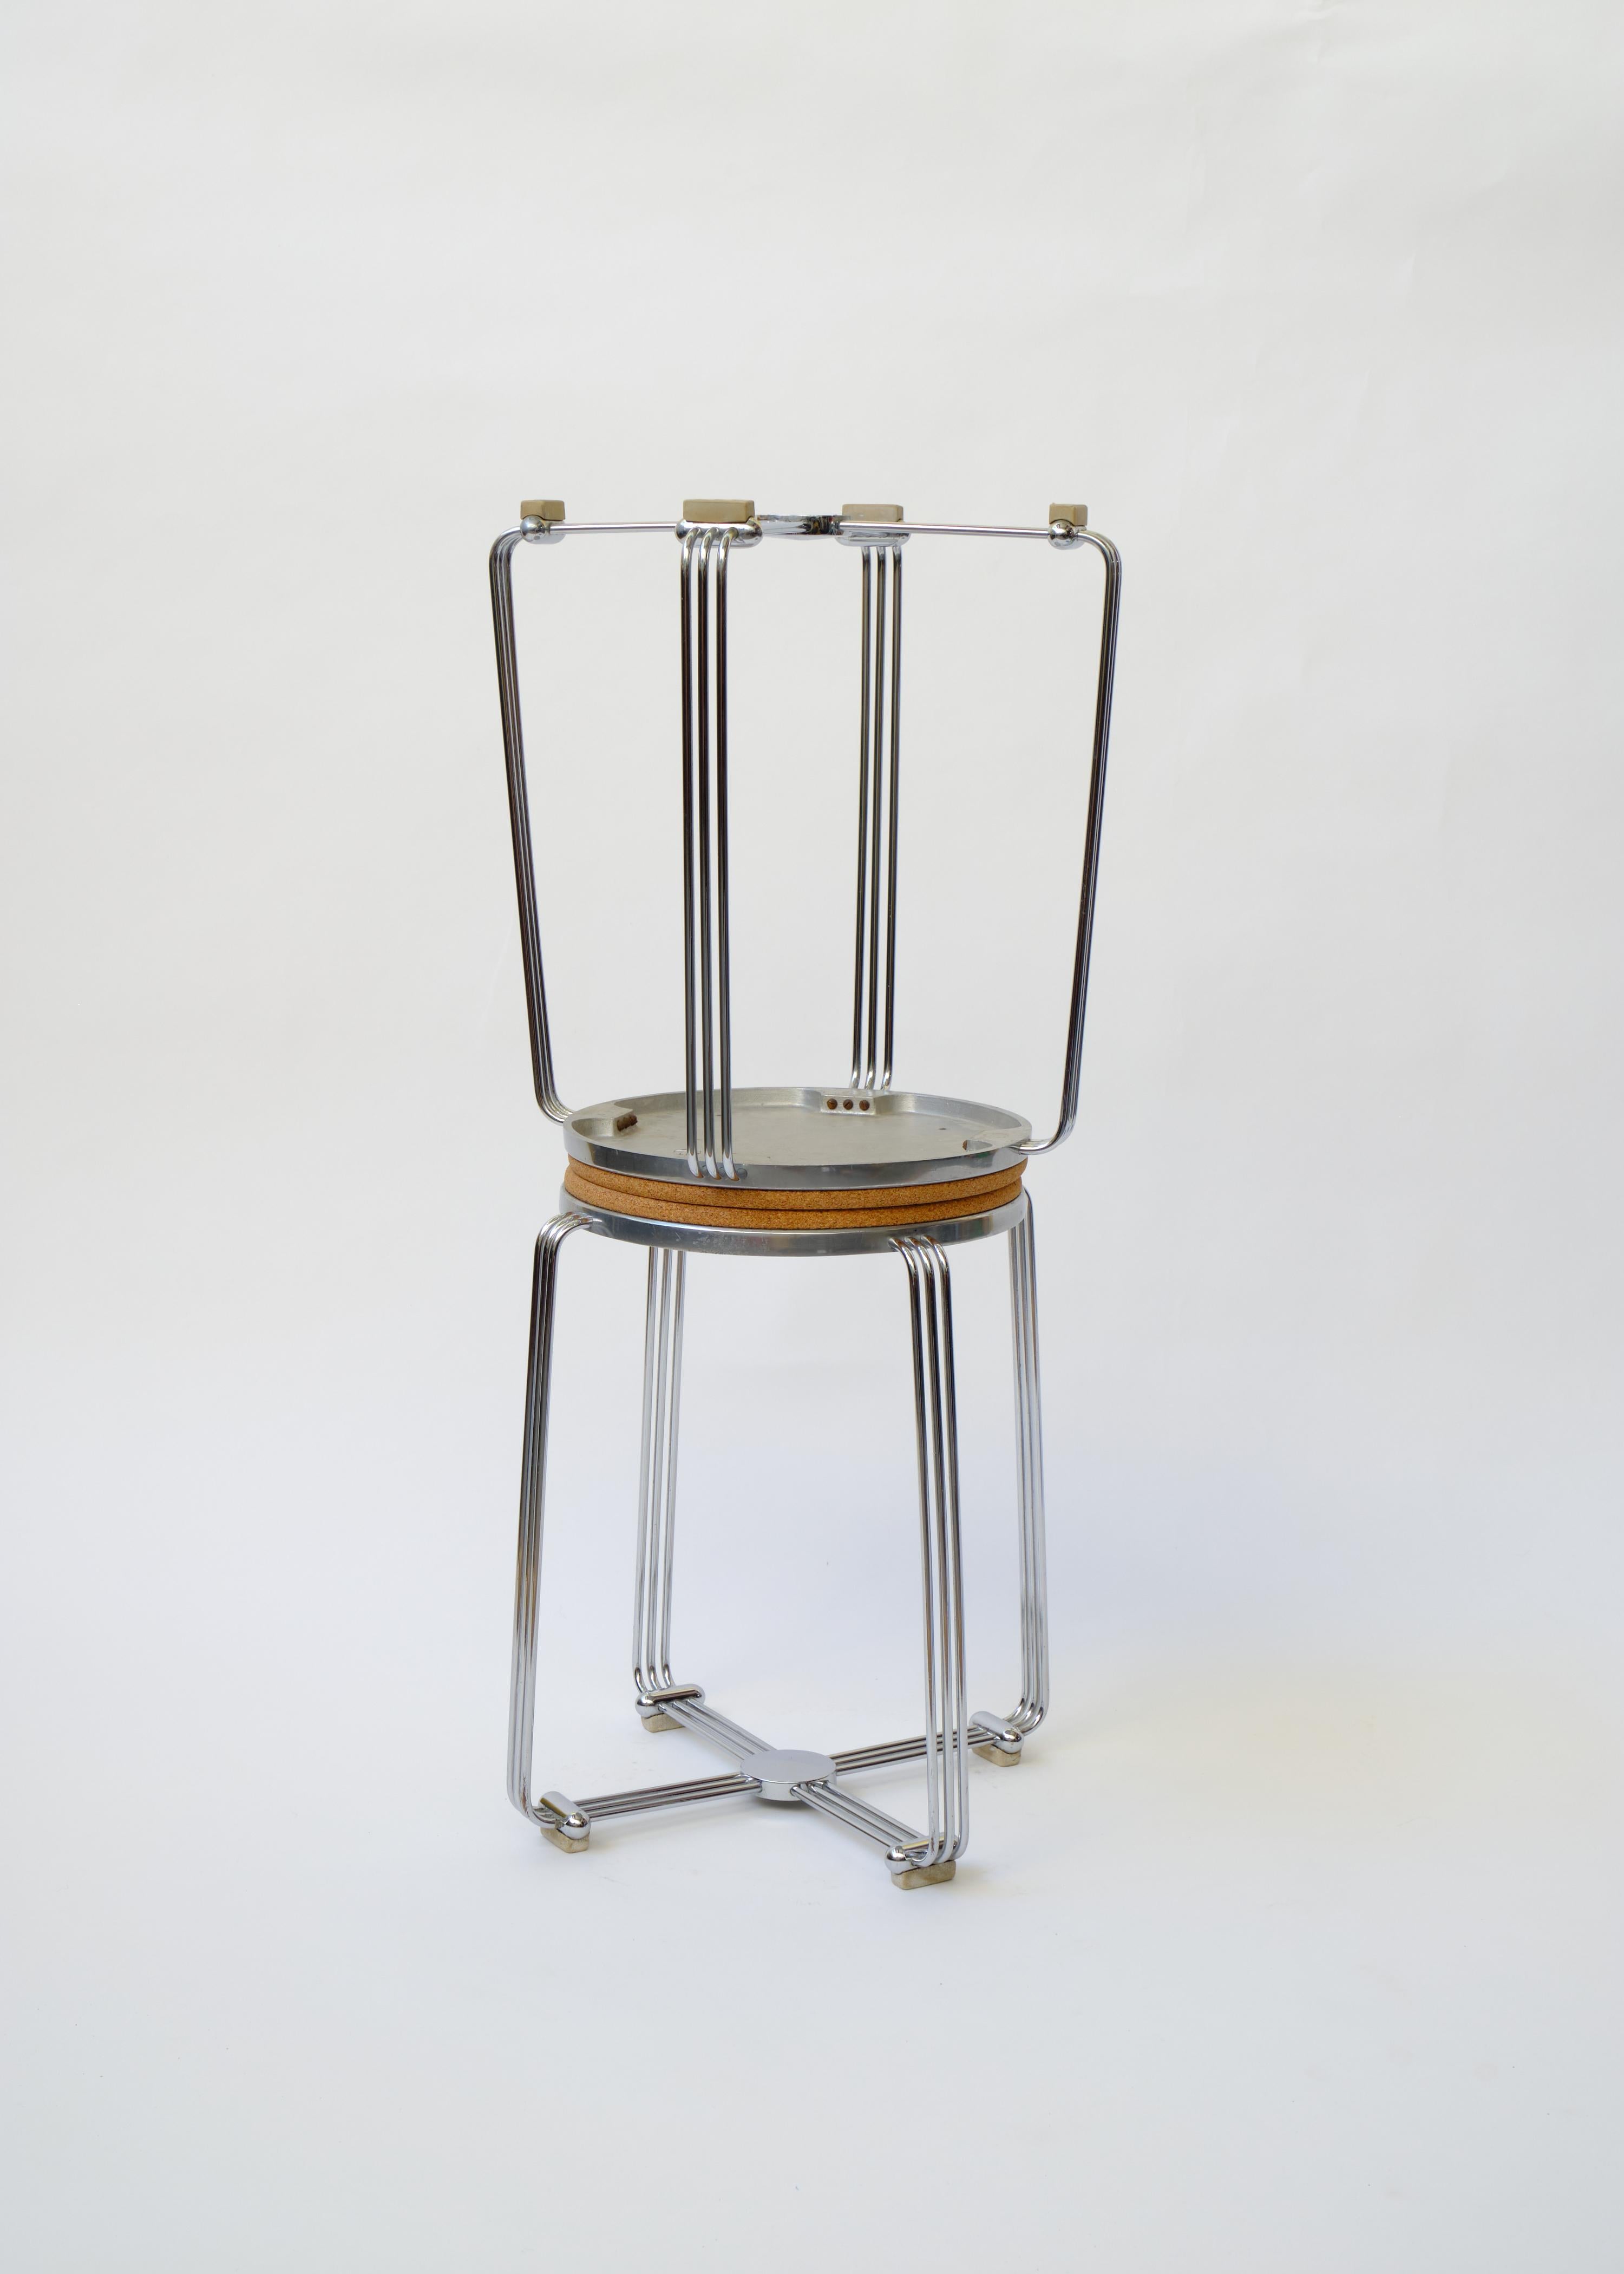 English Art Deco Alpax Chrome and Cork Stool or Side Table For Sale